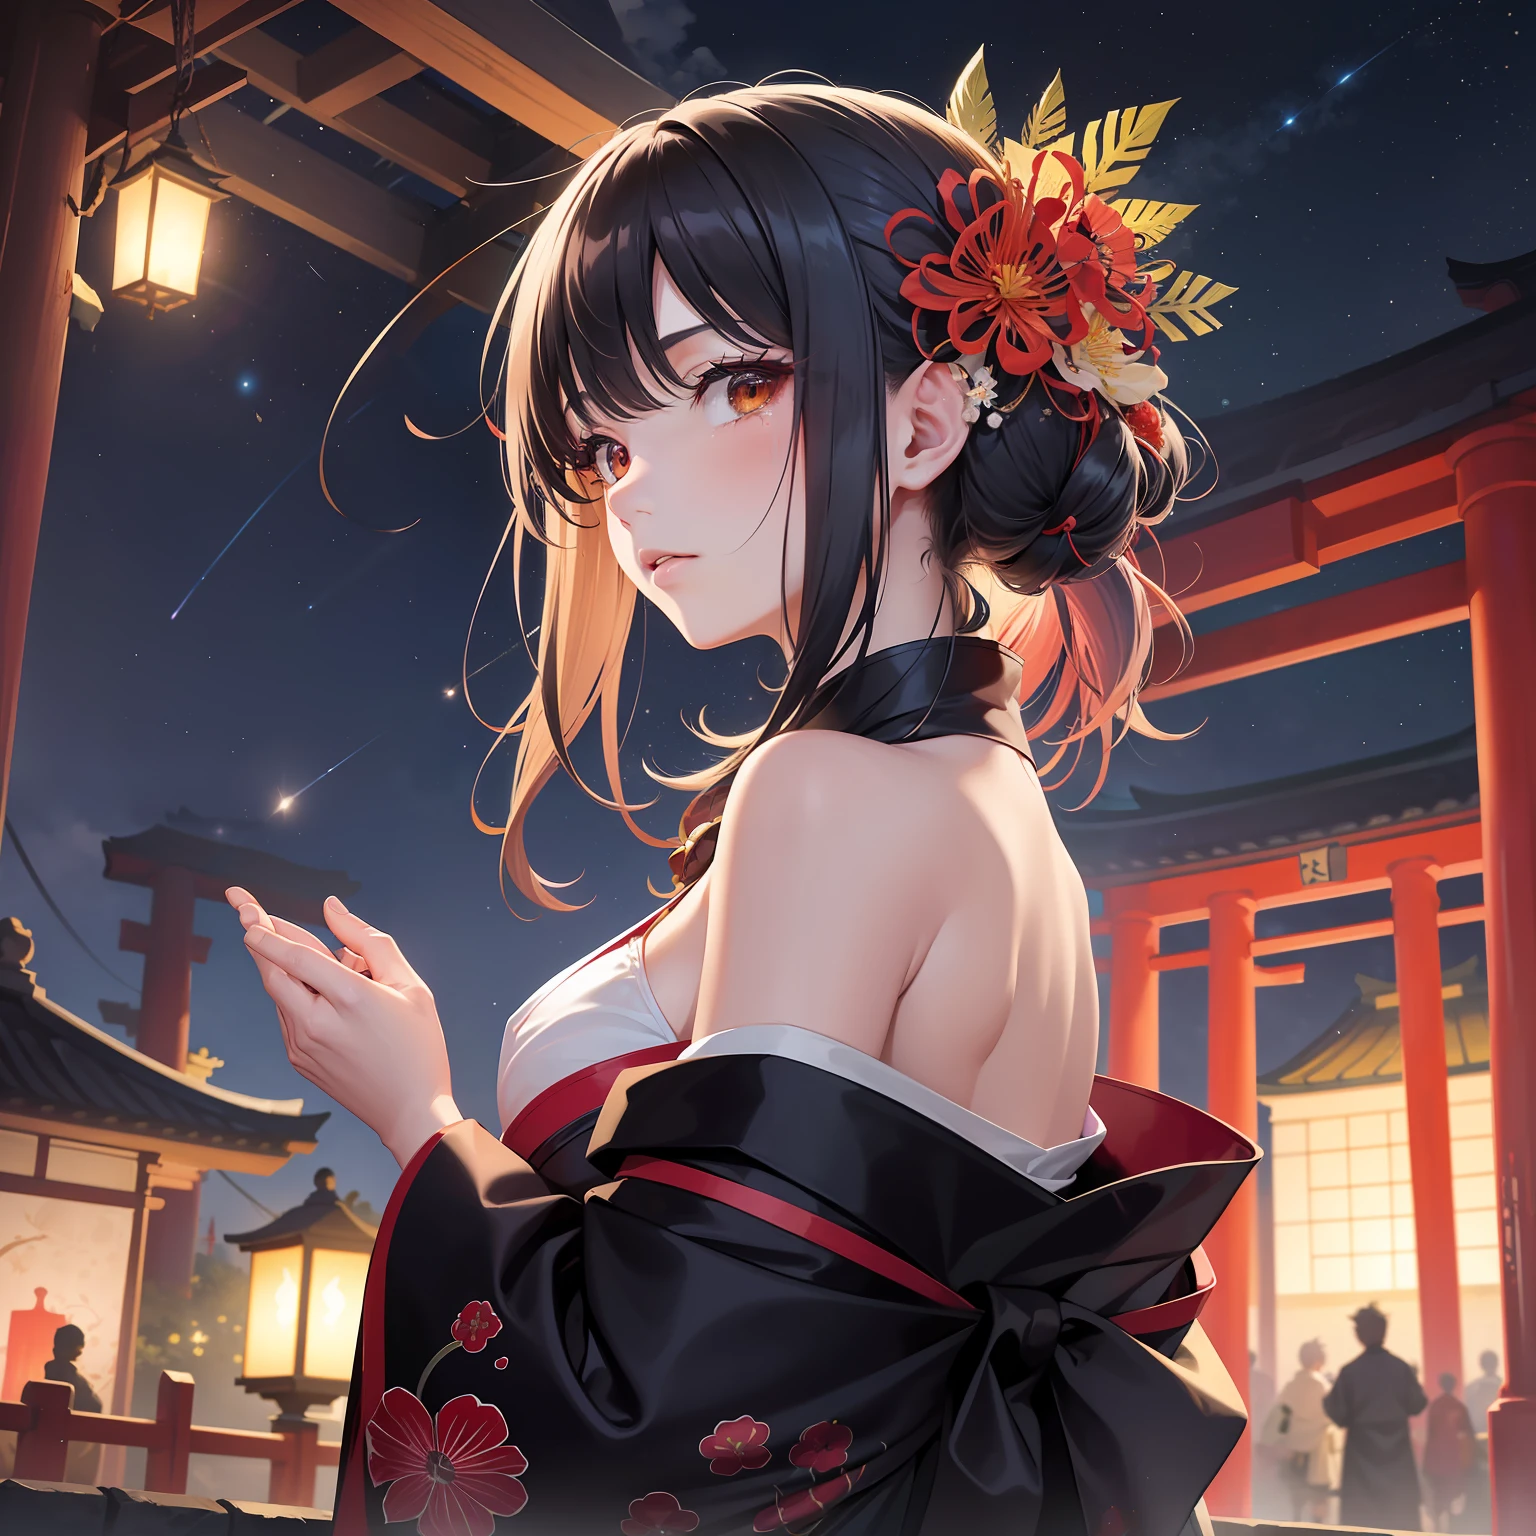 "This is a beautiful and aesthetic watercolor painting, Featuring Hair Girl, Decorated with spider lilies (Higanbana) Flowers, It's a vivid mix of half black and half red, reminiscent of impressive licorice flowers,. She wears a black kimono, Dance in front of a large torii gate. Set in a dark night、Starry sky nearby, Full of stars that seem to be within reach. Water and brightly colored sides complement the scene, Create an overall mystical atmosphere. The scenery around the shrine is not only breathtaking、It's also surreal, With lantern shining with fantastic light. The girl is depicted in tears while looking at fragments of memories, Express feelings of parting. It is very fantastic, Still a poignant image."